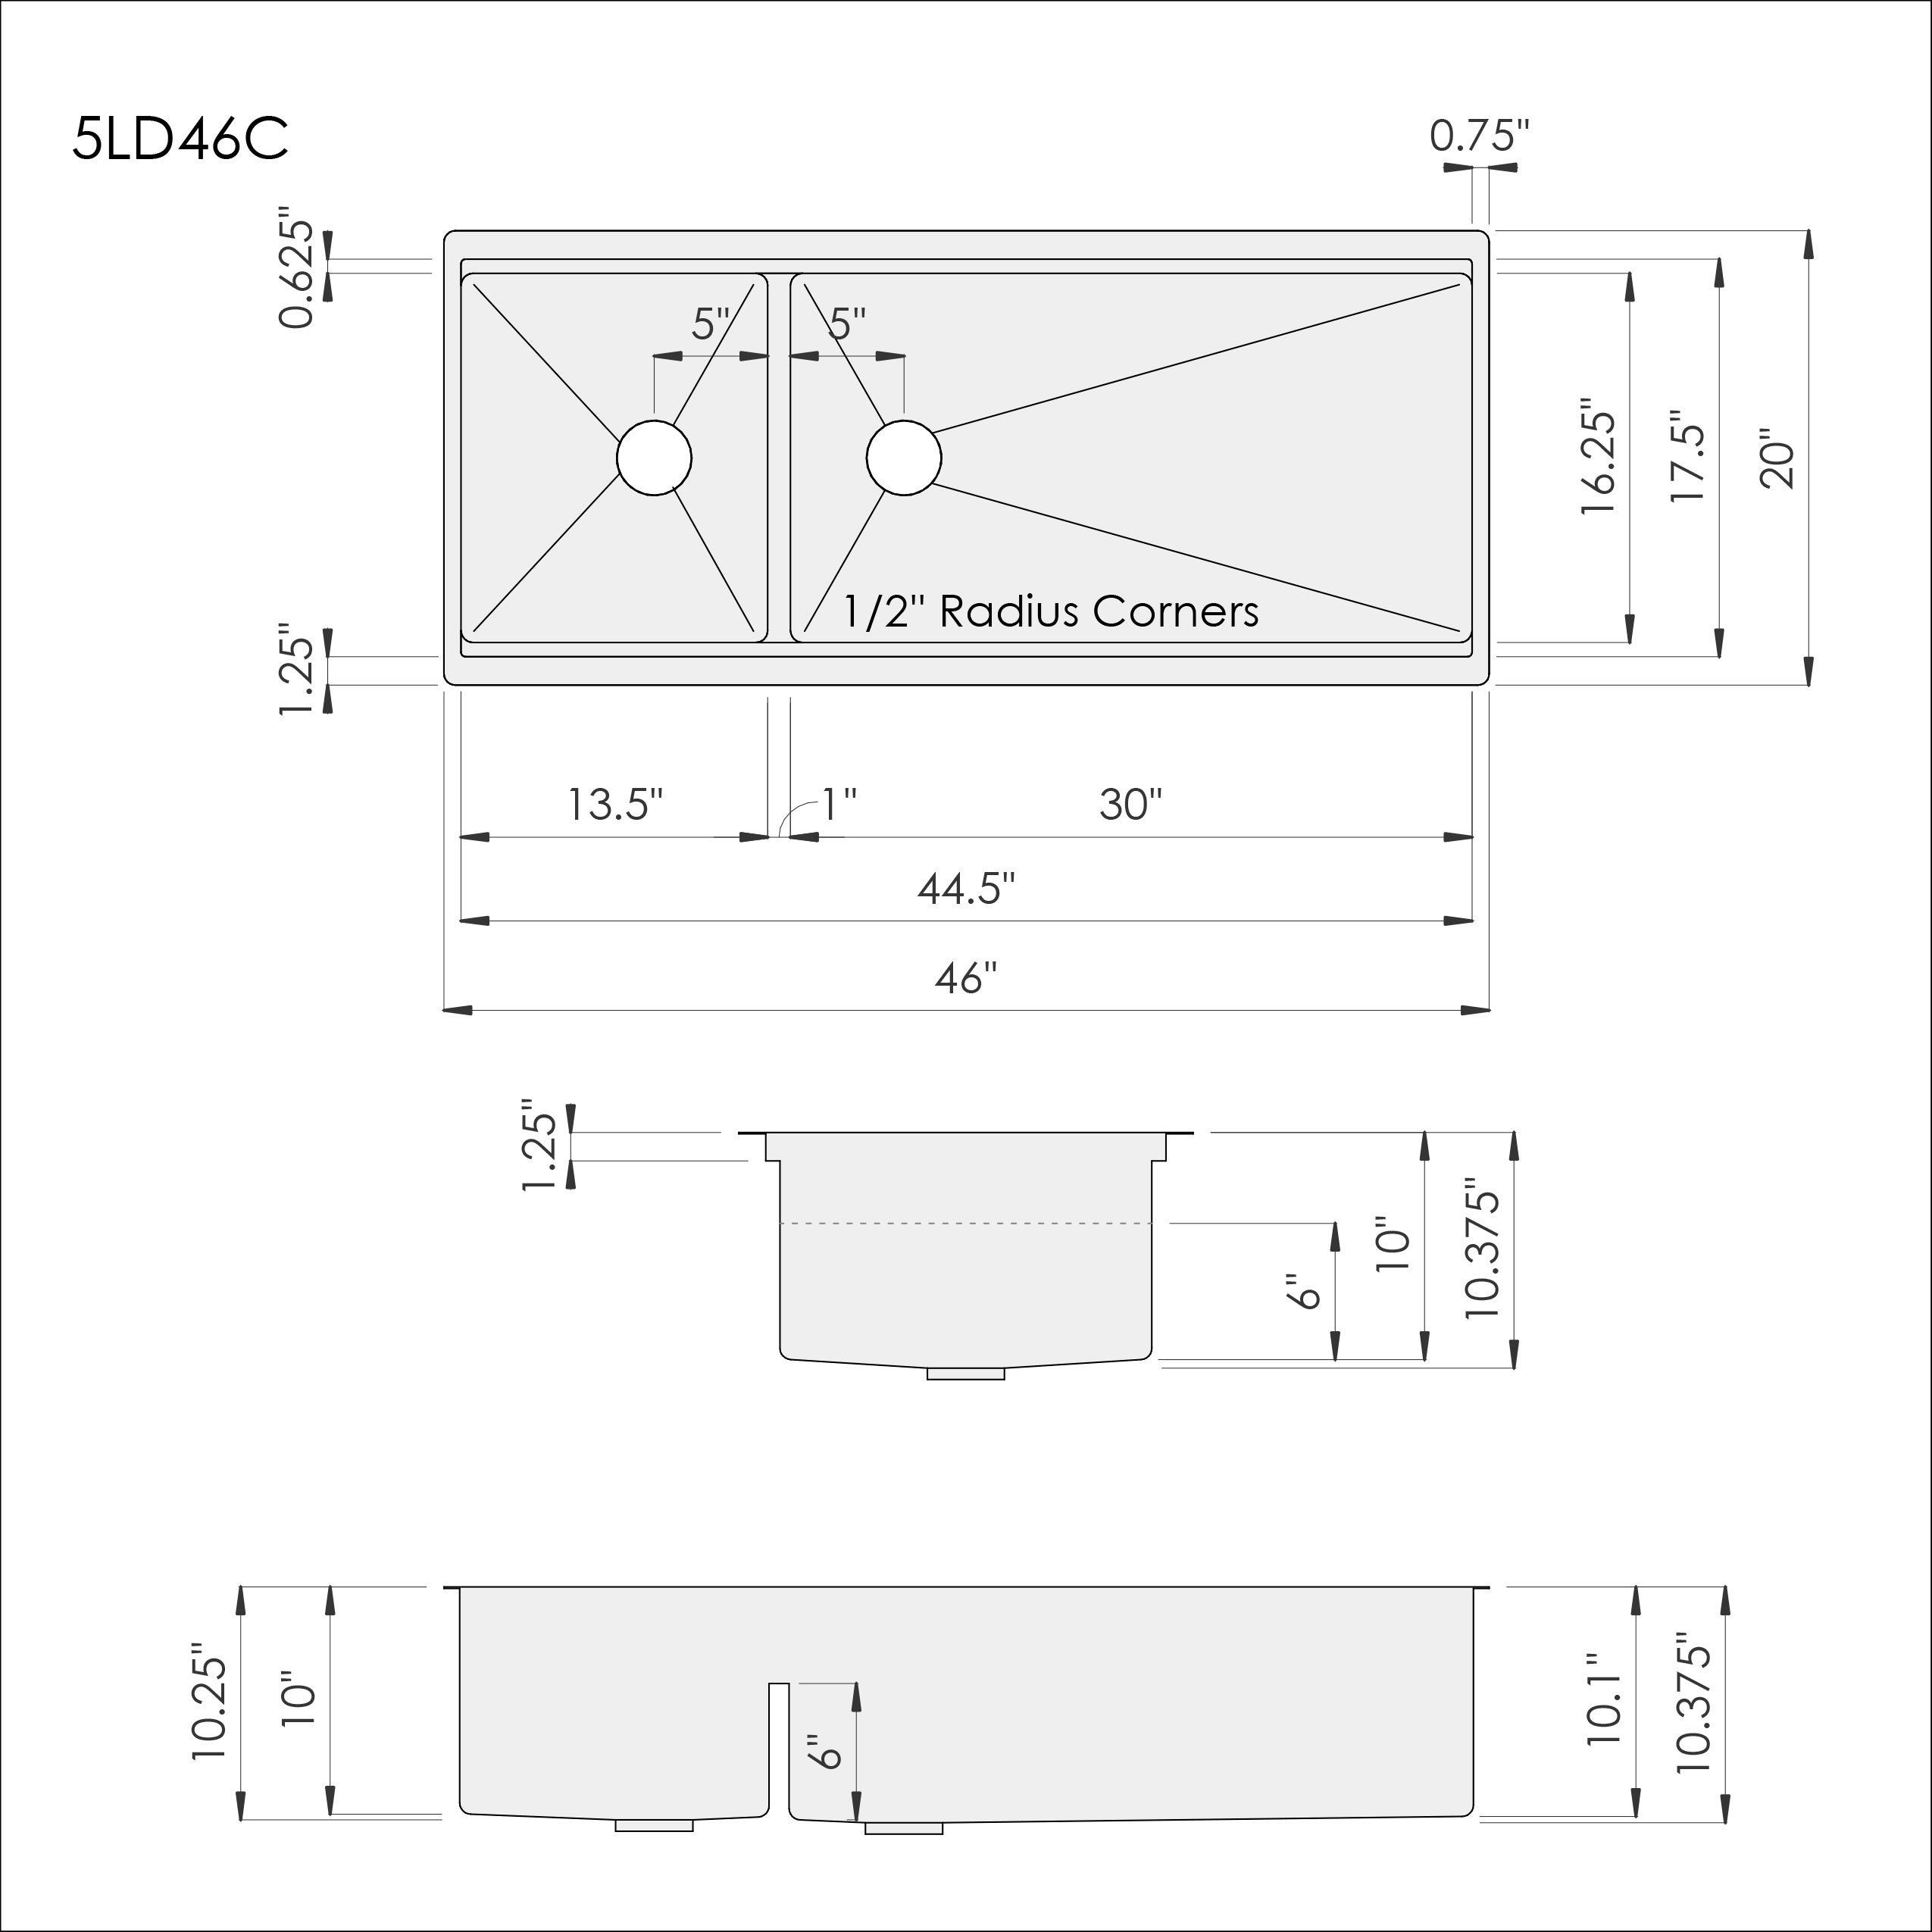 Dimensions for Create Good Sinks 46 inch double bowl workstation sink. Made with 304, 16 gauge stainless steel and designed for undermount installation. Reversible design, you can put the large bowl to either side. Half inch radius corners for easy cleaning, patented seamless drain, and smart low divider